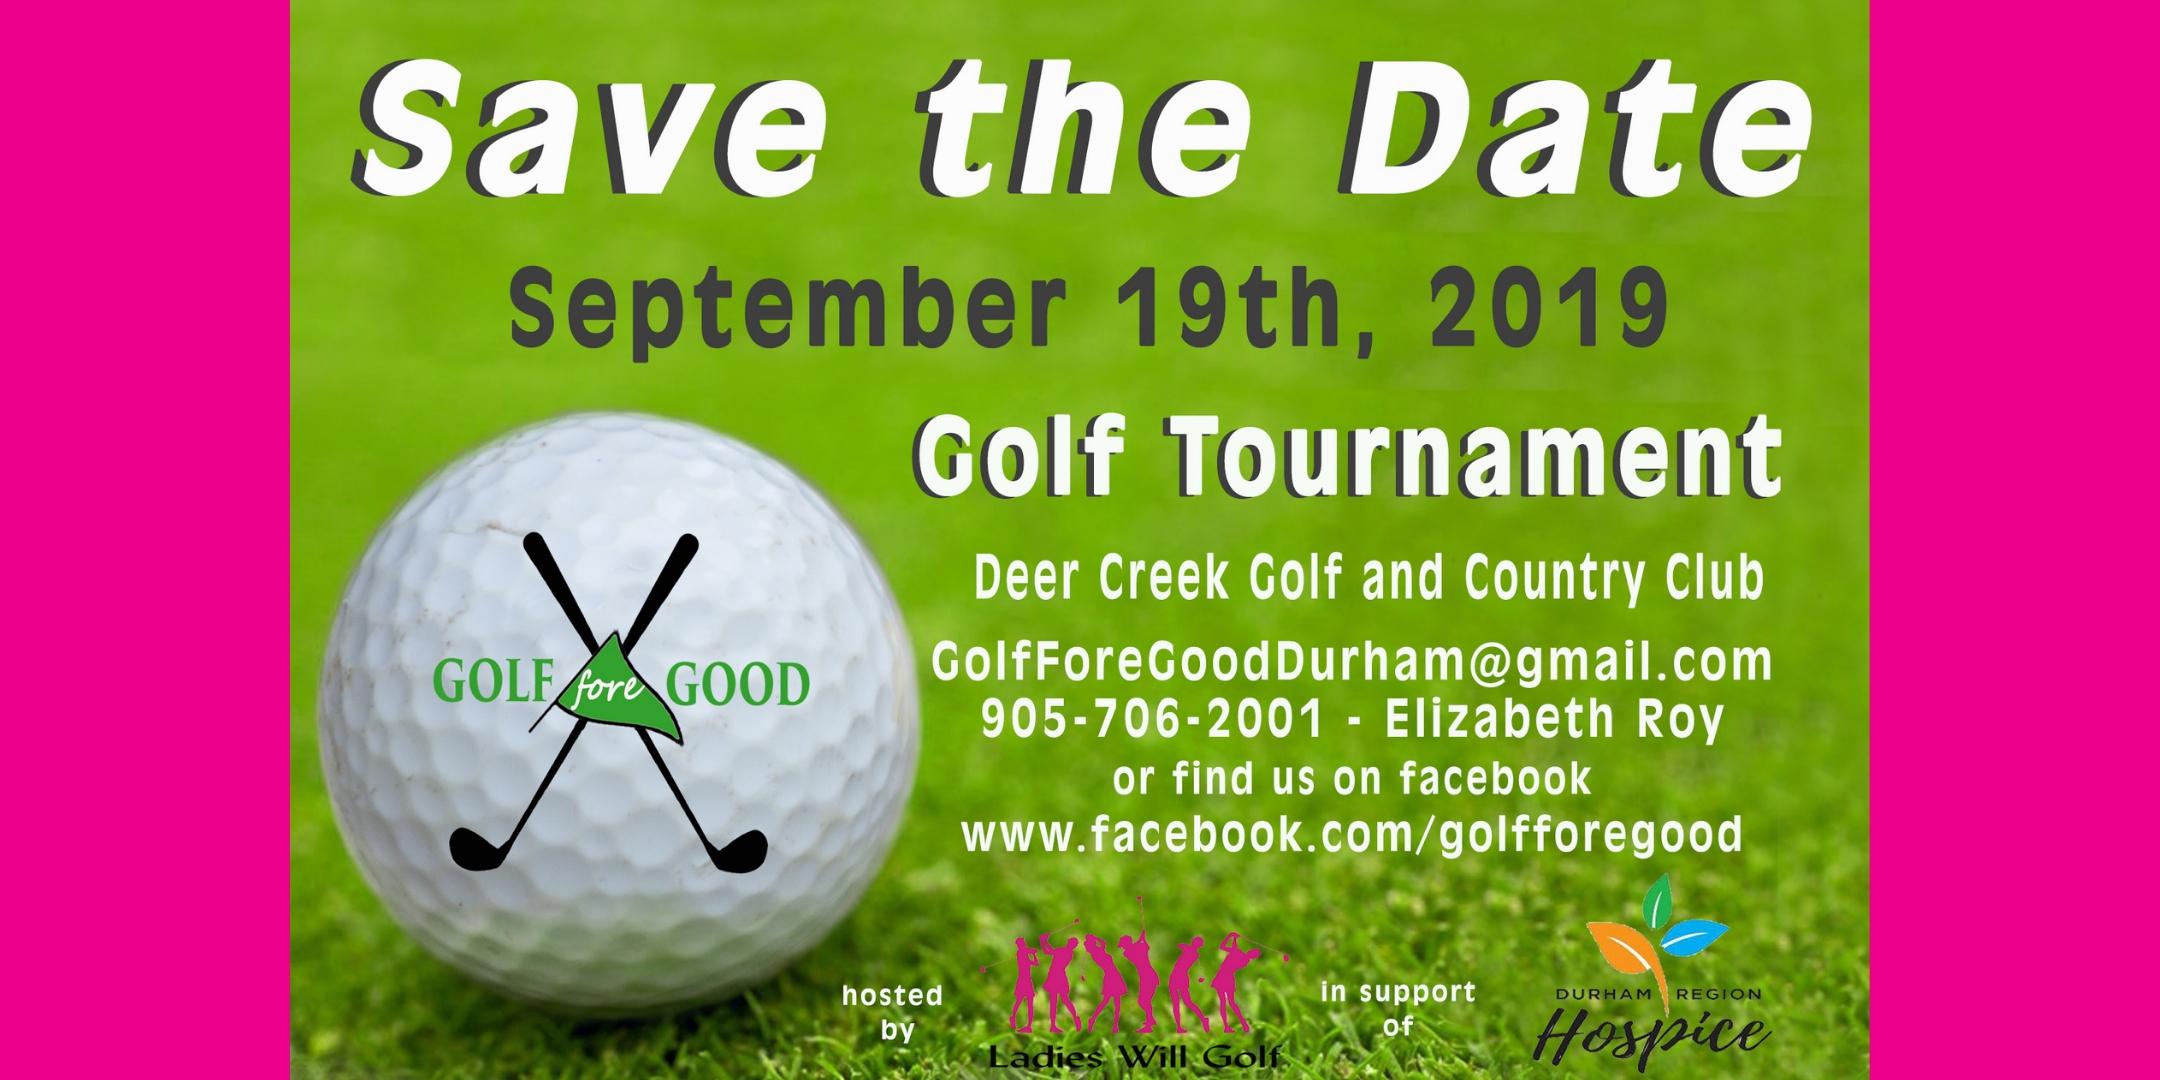 Golf Fore Good in support of Durham Region Hospice